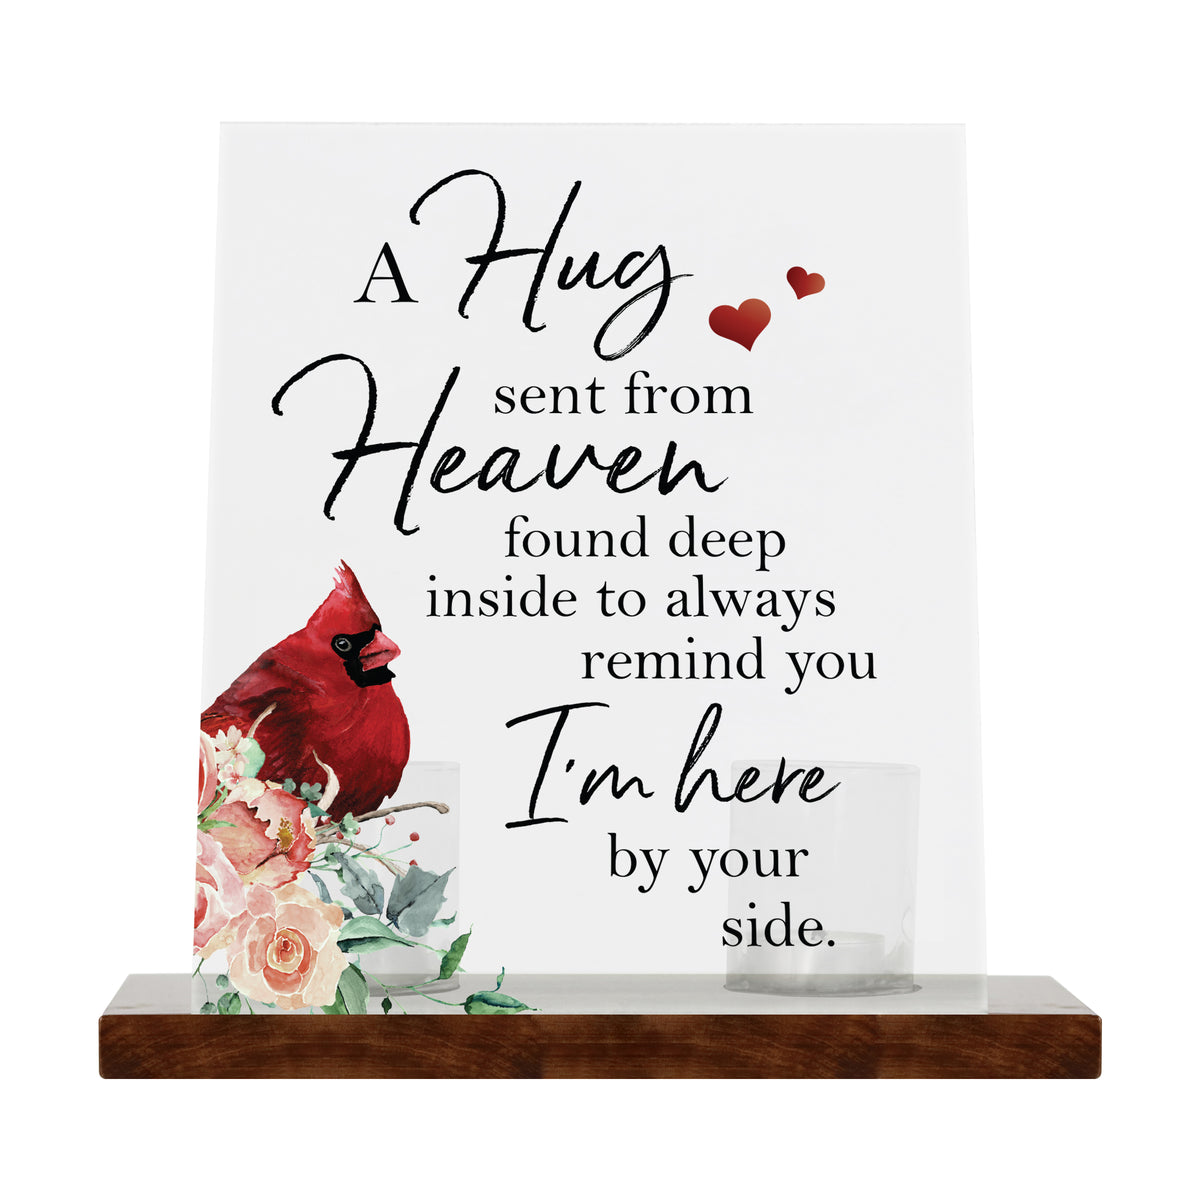 LifeSong Memorials Vintage Memorial Cardinal Acrylic Sign Candle Holder With Wood Base And Glass Votives For Home Decor | A Hug Sent From Heaven. Living Room, Bedroom, Kitchen, Dining Room, and Entryways perfect memorial bereavement keepsake gift ideas for Family &amp; Friends.